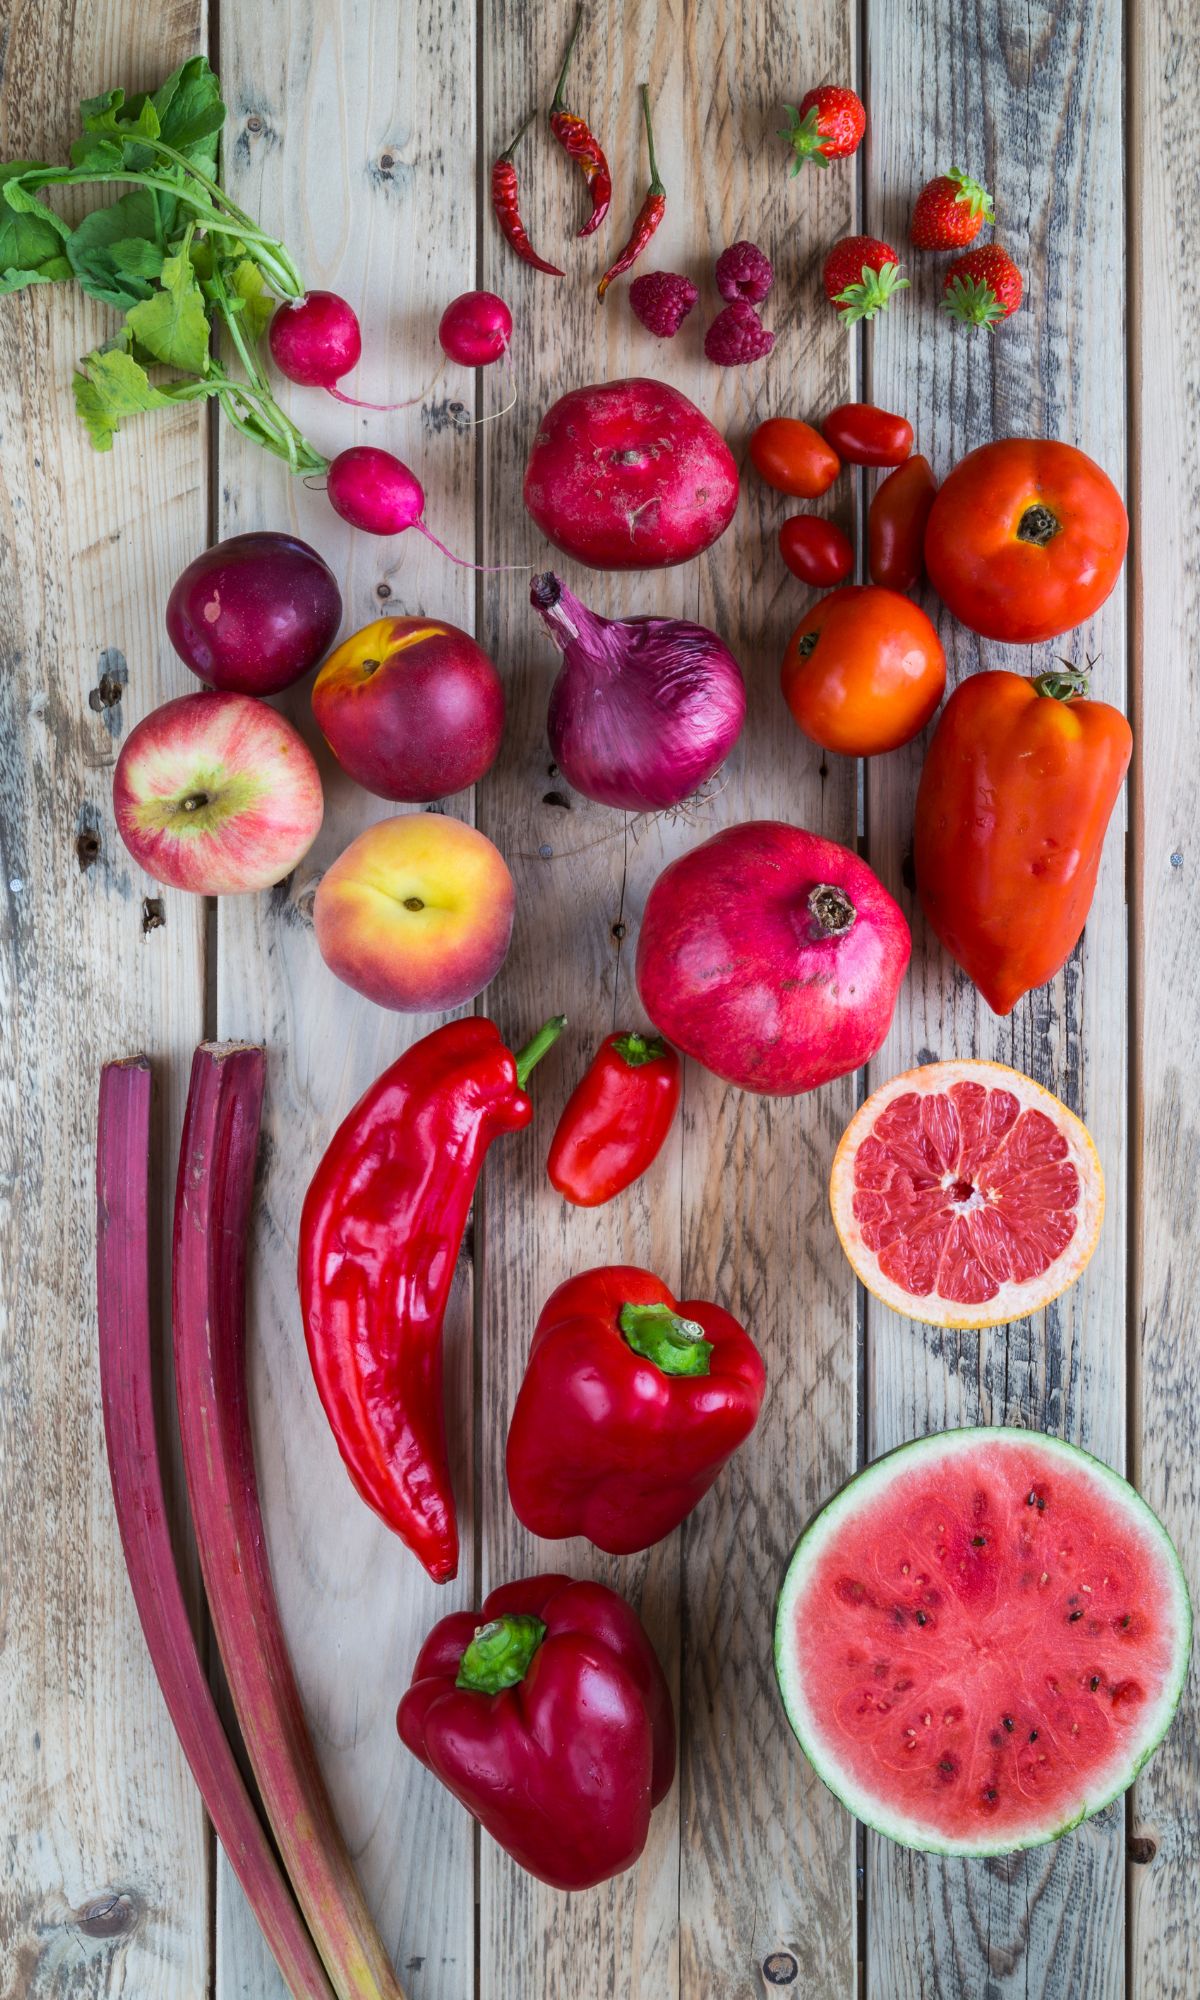 Some of the best red fruits laid out on a wooden table.